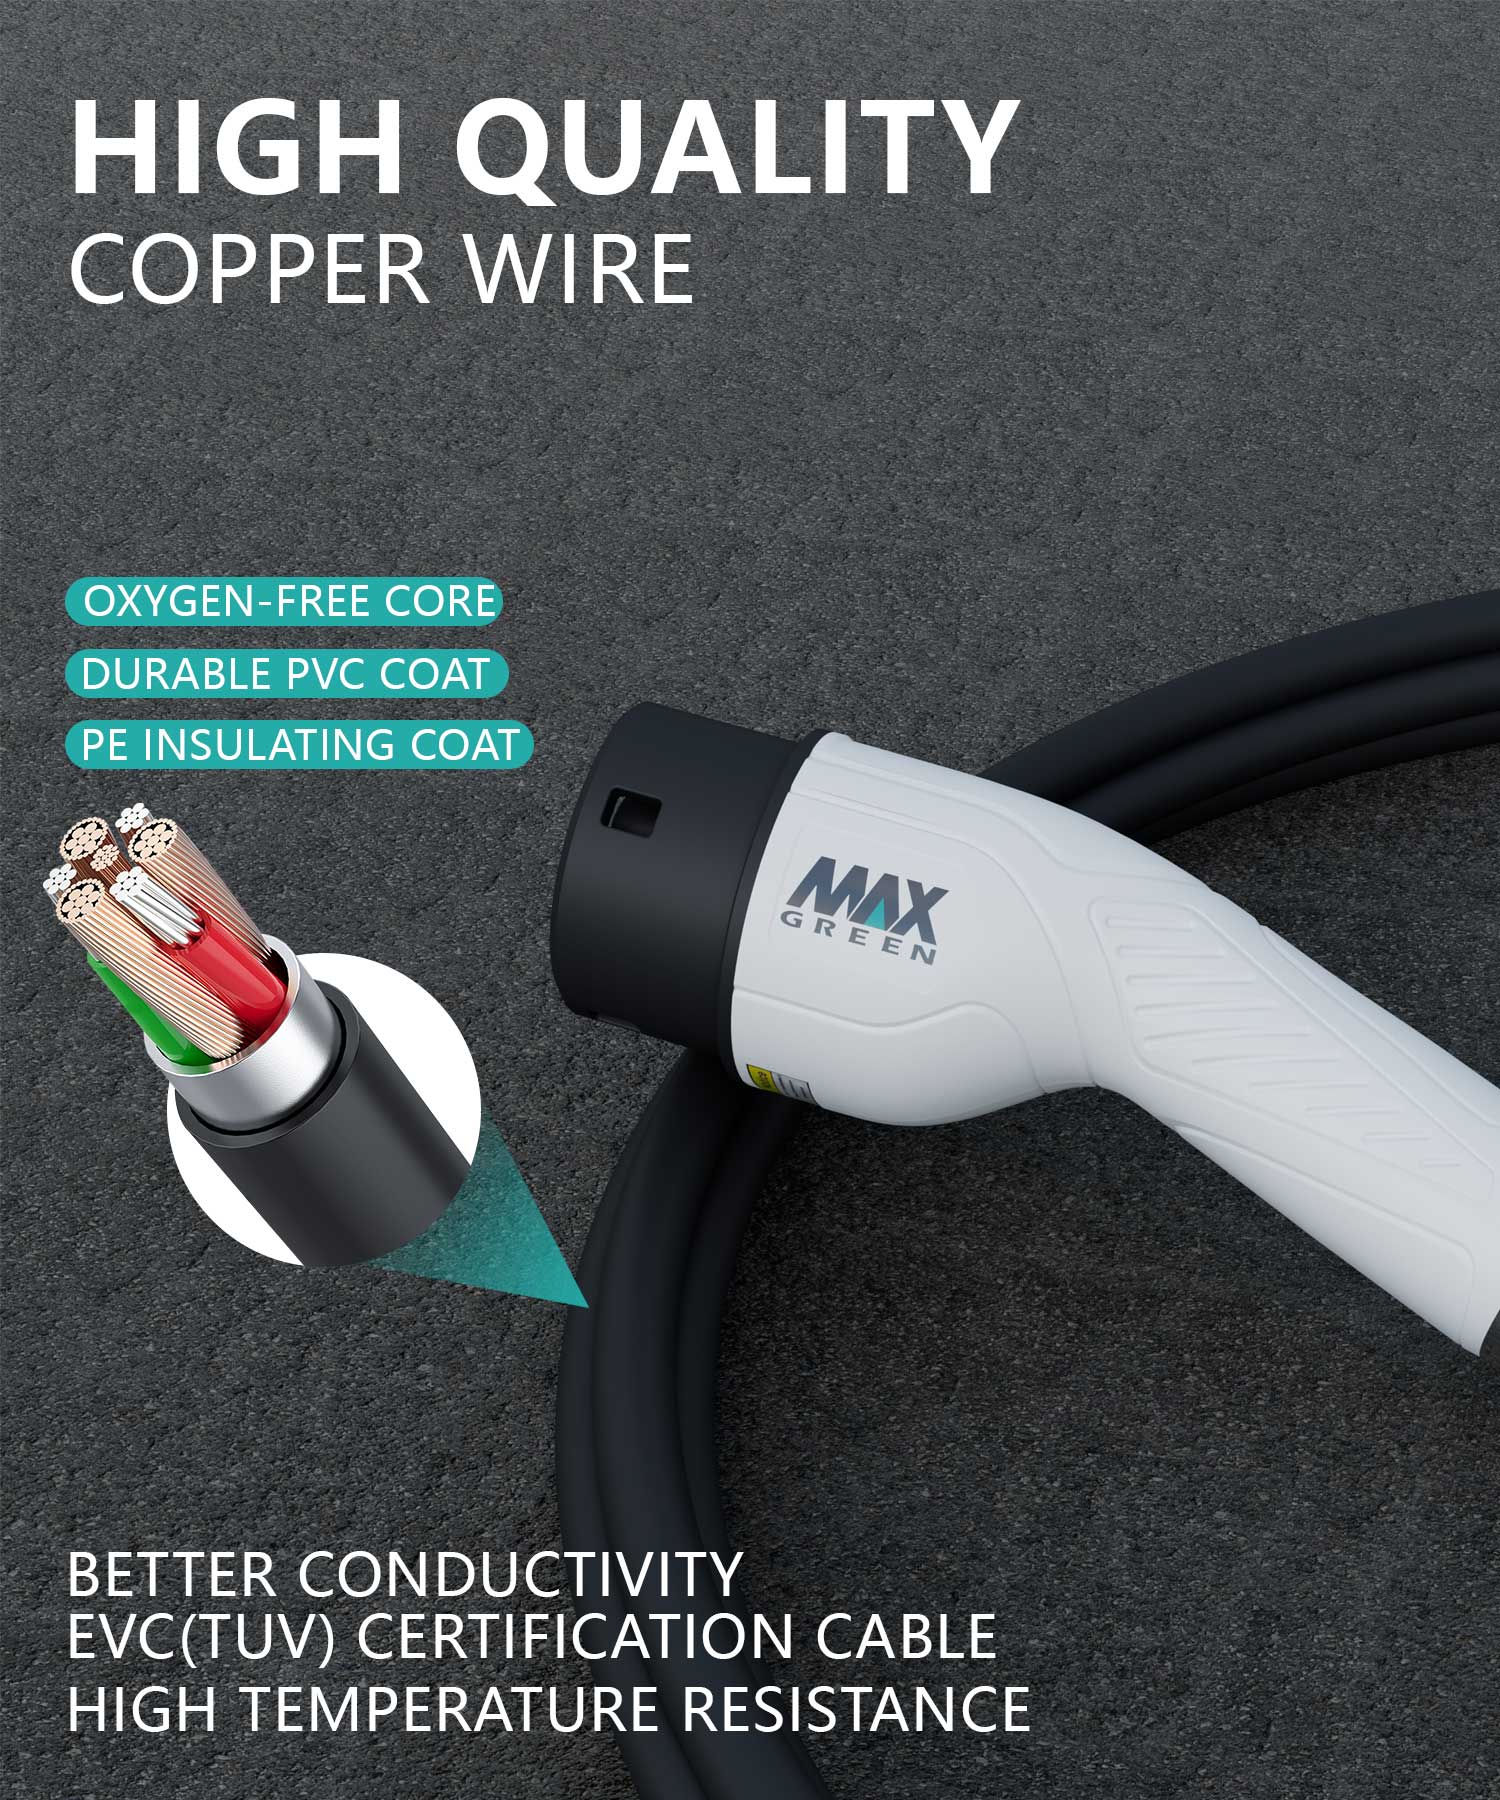 EV Charging cable with high quality copper wire